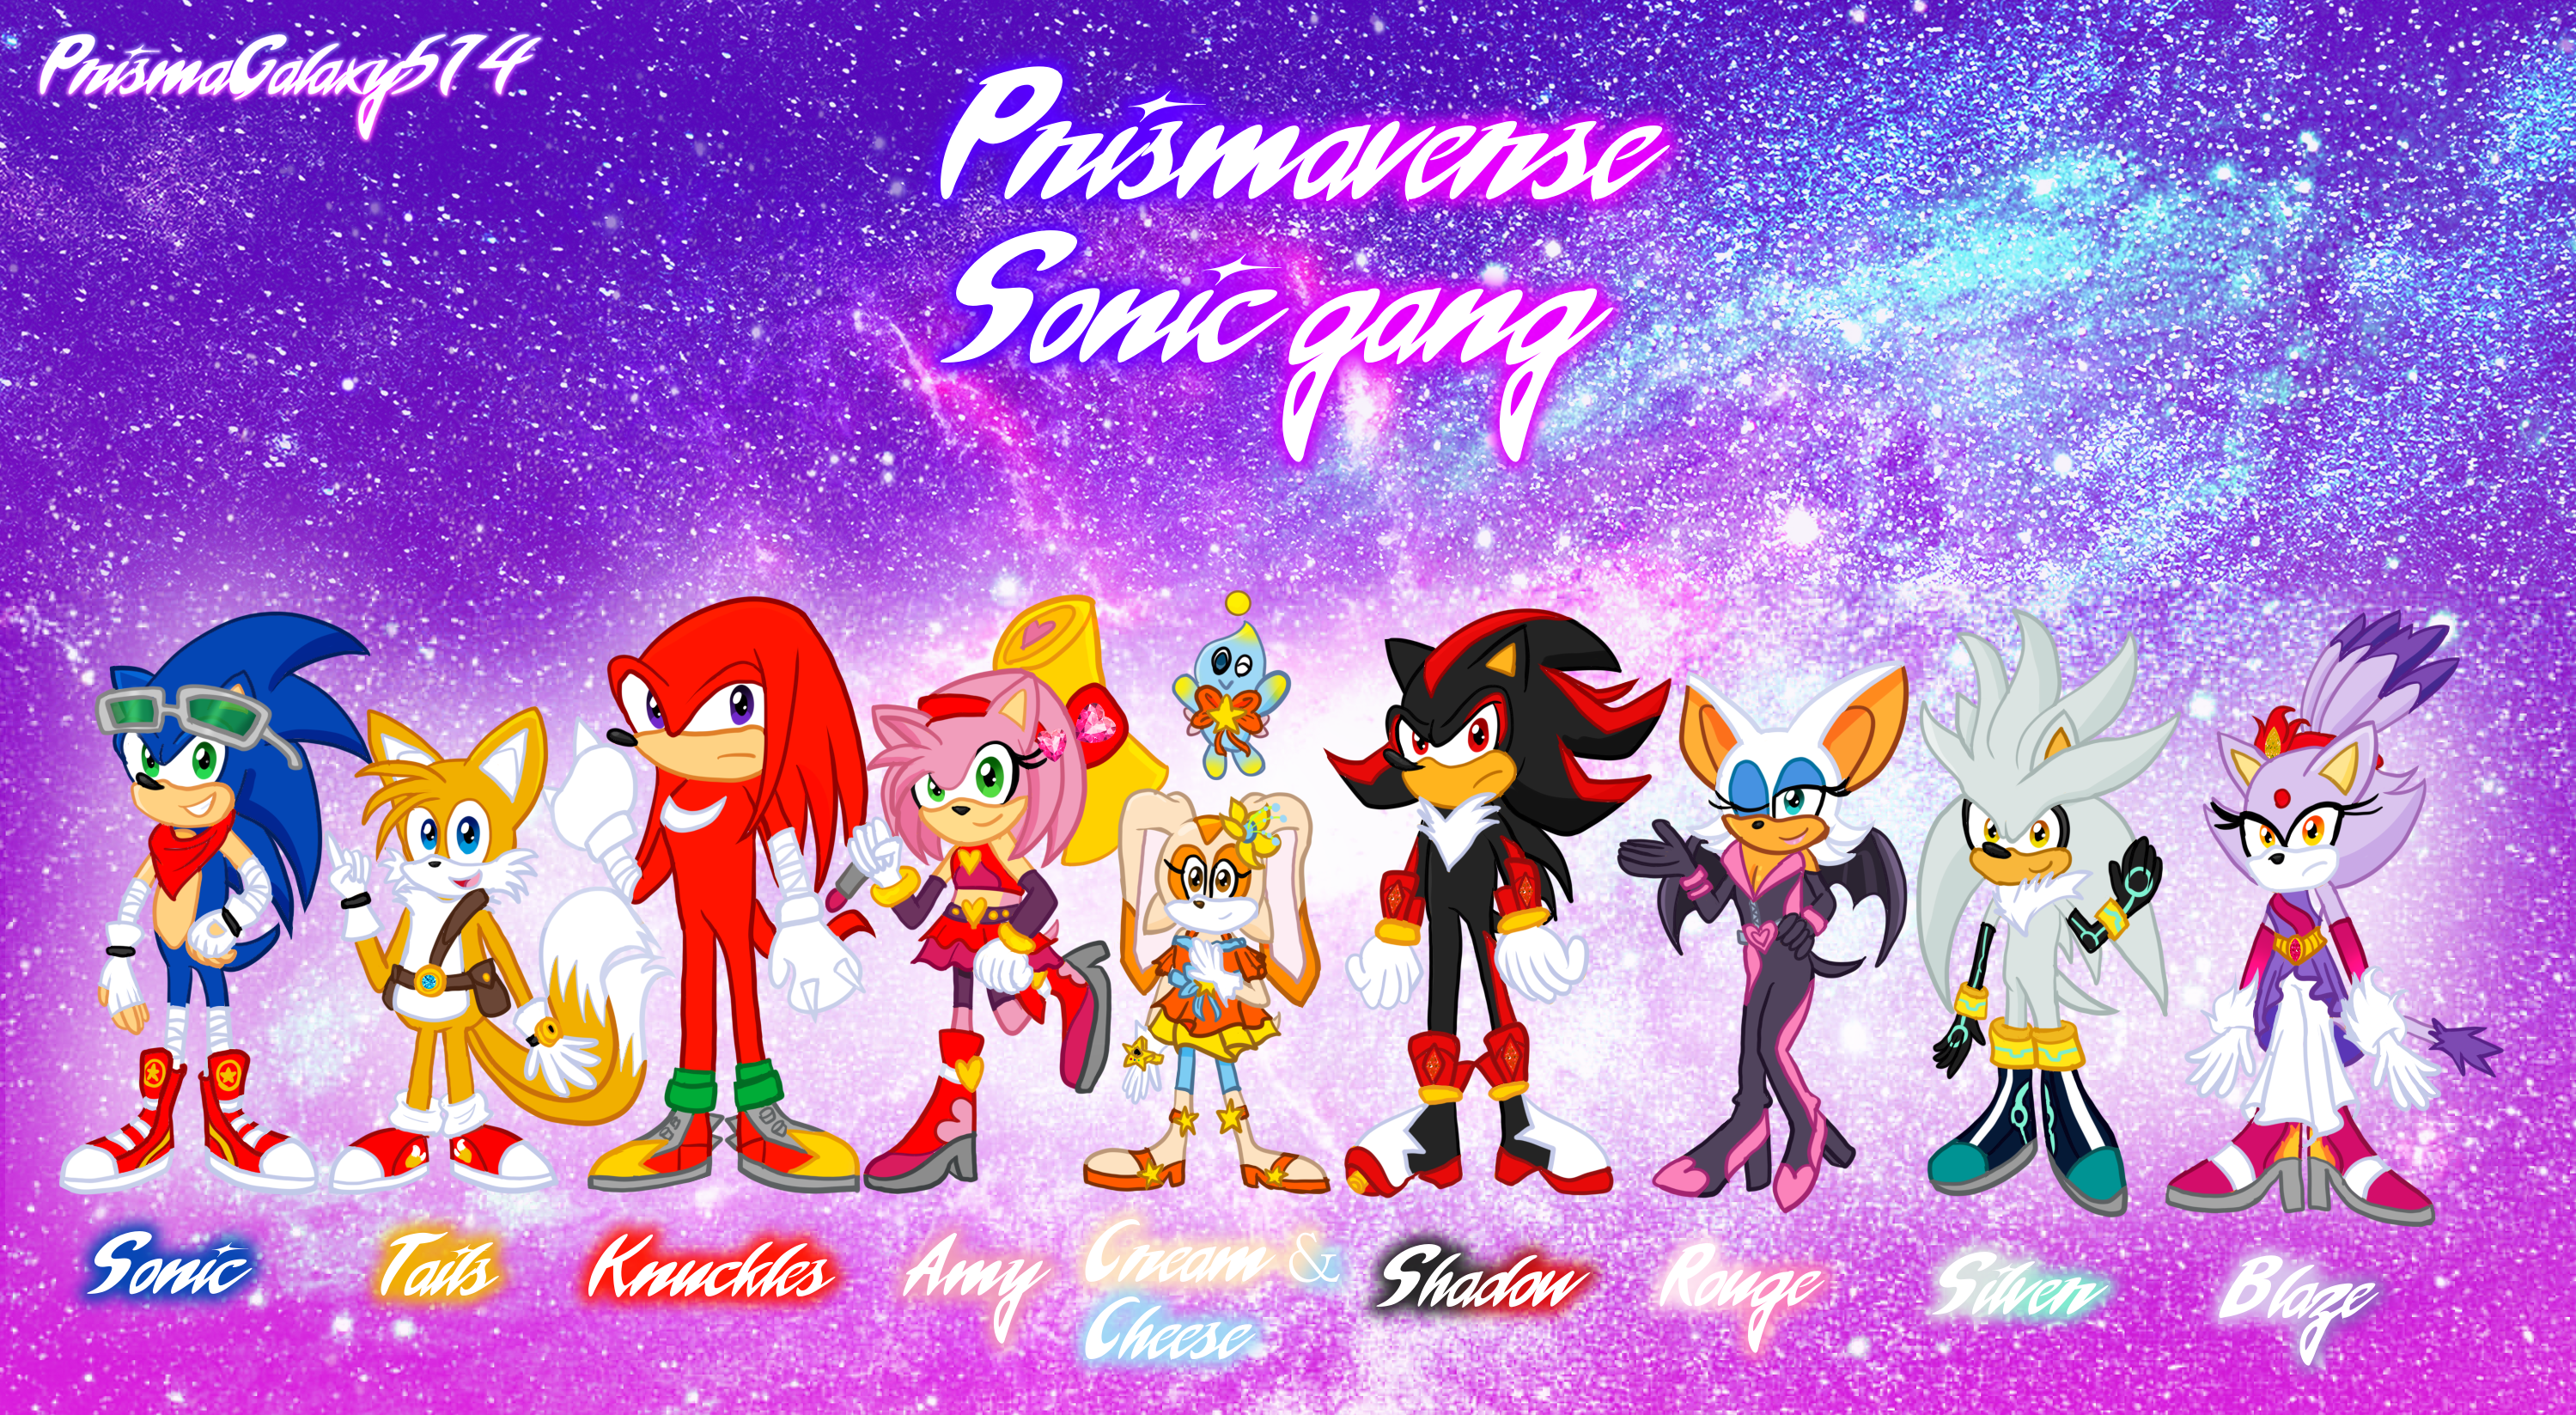 Combining 7 Sonic Characters Into 1! Sonic, Tails, Knuckles, Shadow, Silver,  Amy, Blaze 